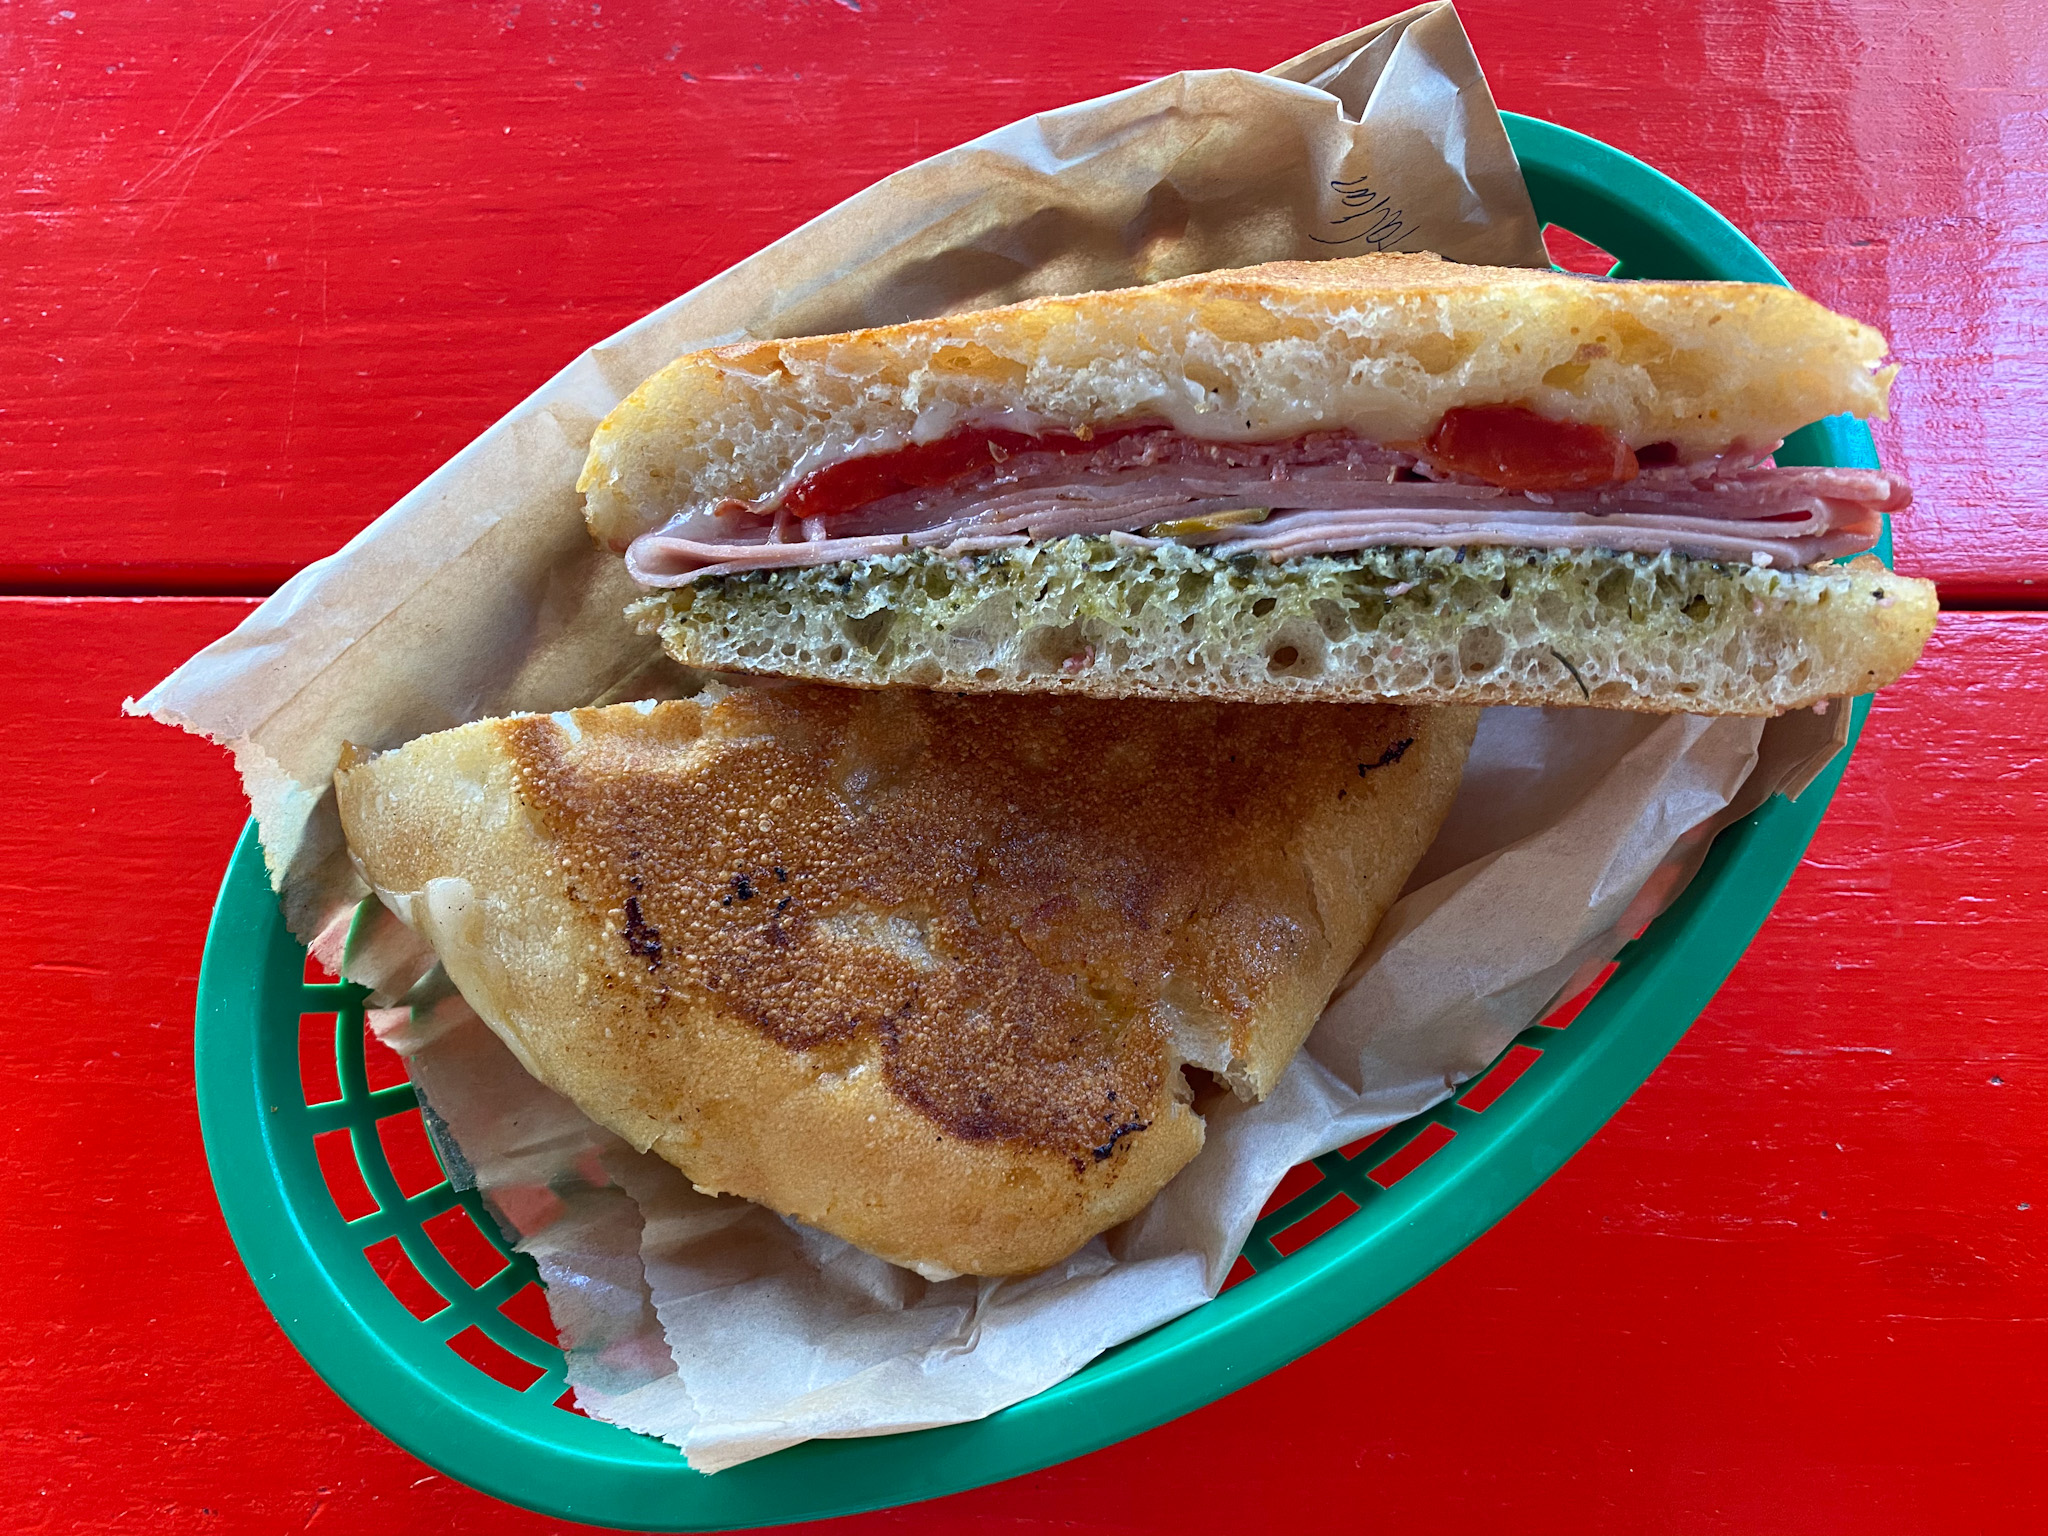 The Italian - the most popular sandwich at Brooklyn South